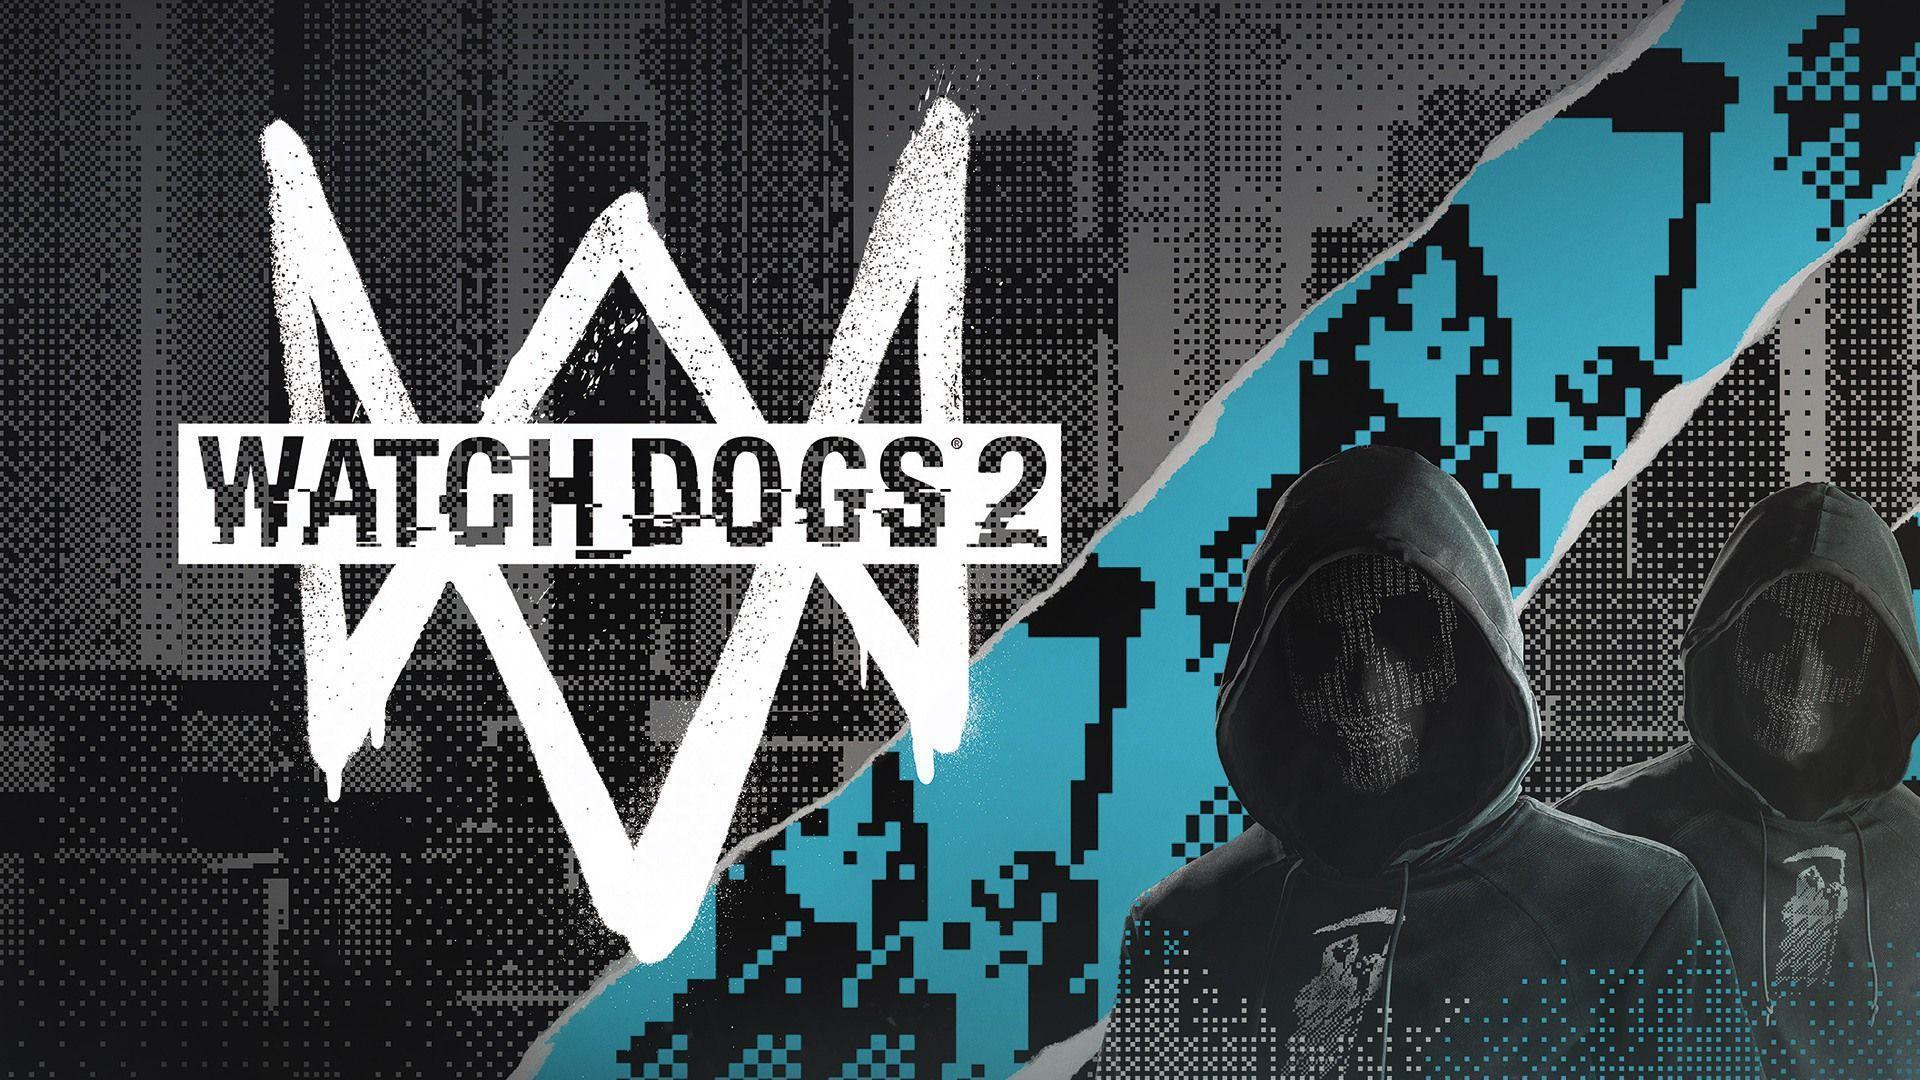 Watch Dogs 2 (Game) Wallpaper